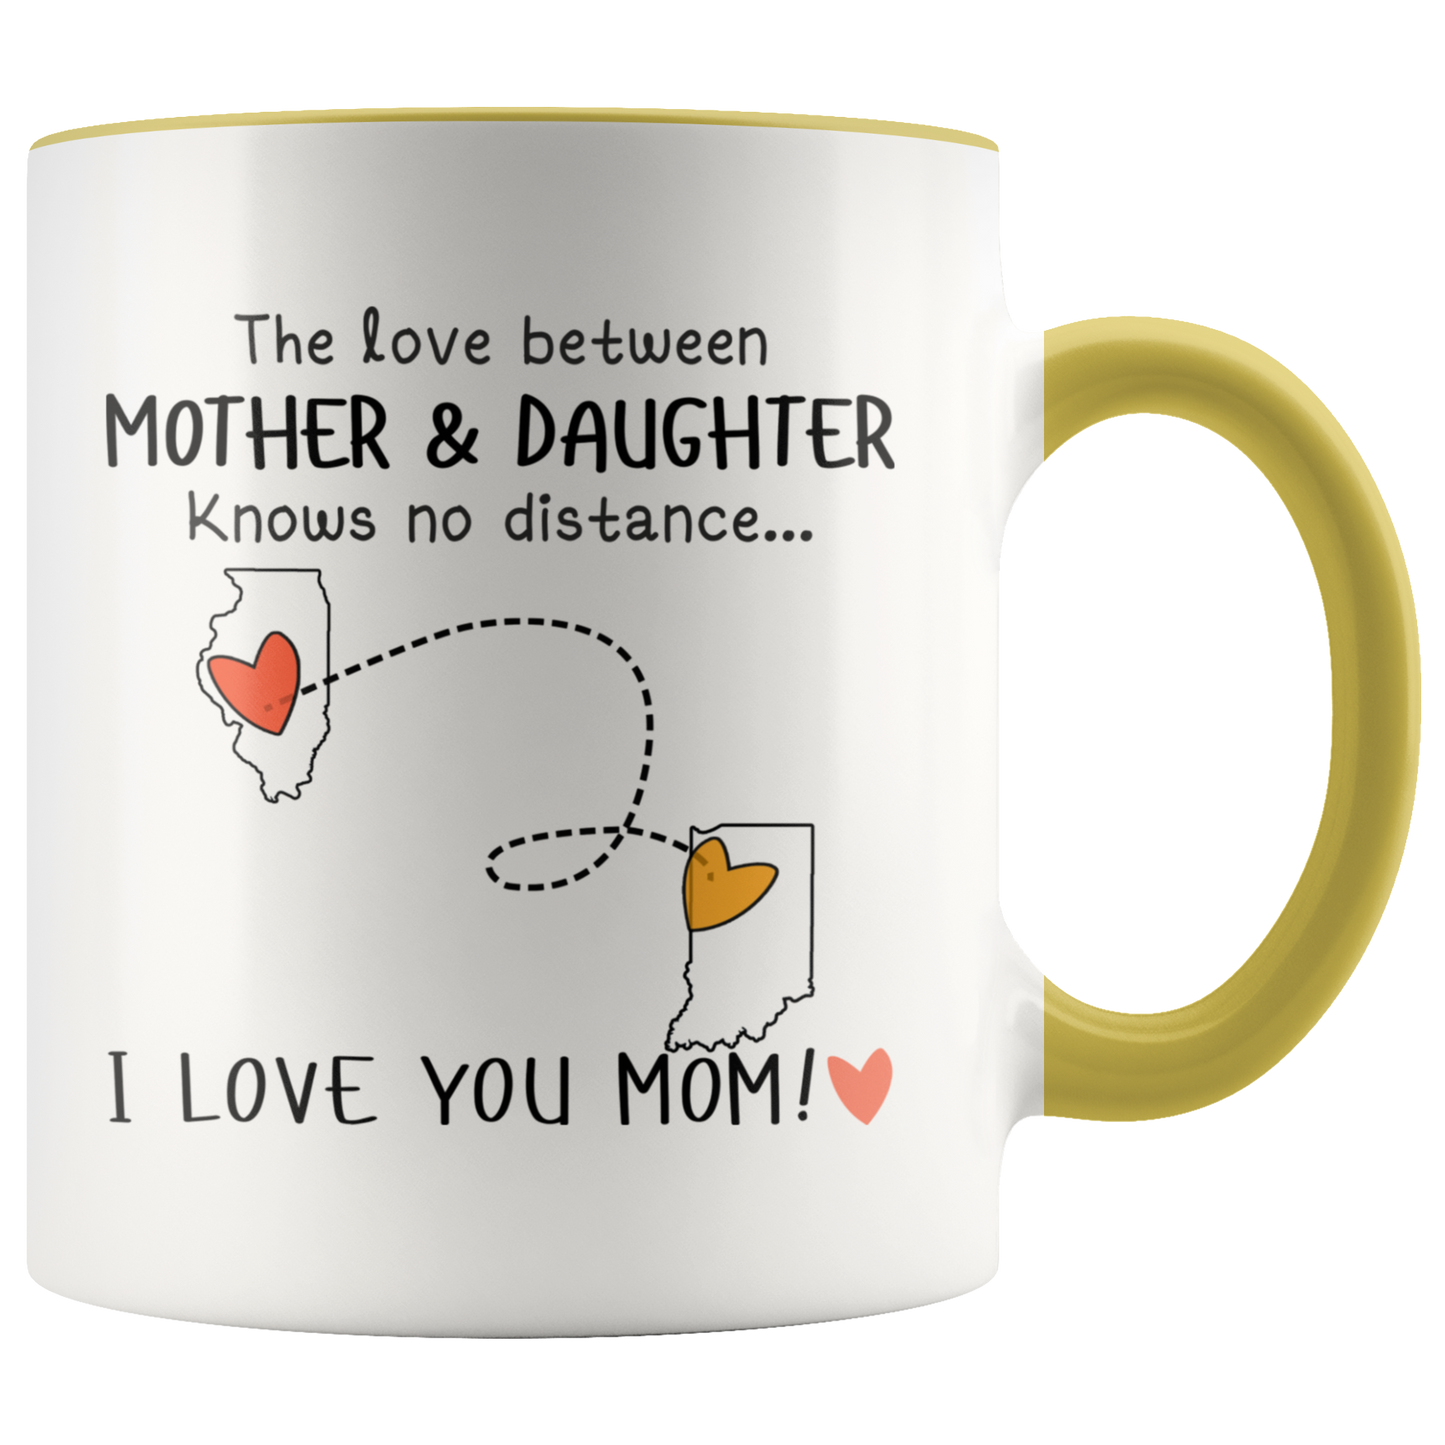 MUG01221337268-sp-23884 - [ Illinois | Indiana ]The Love Between Mother And Daughter Knows No Distance, I Lo